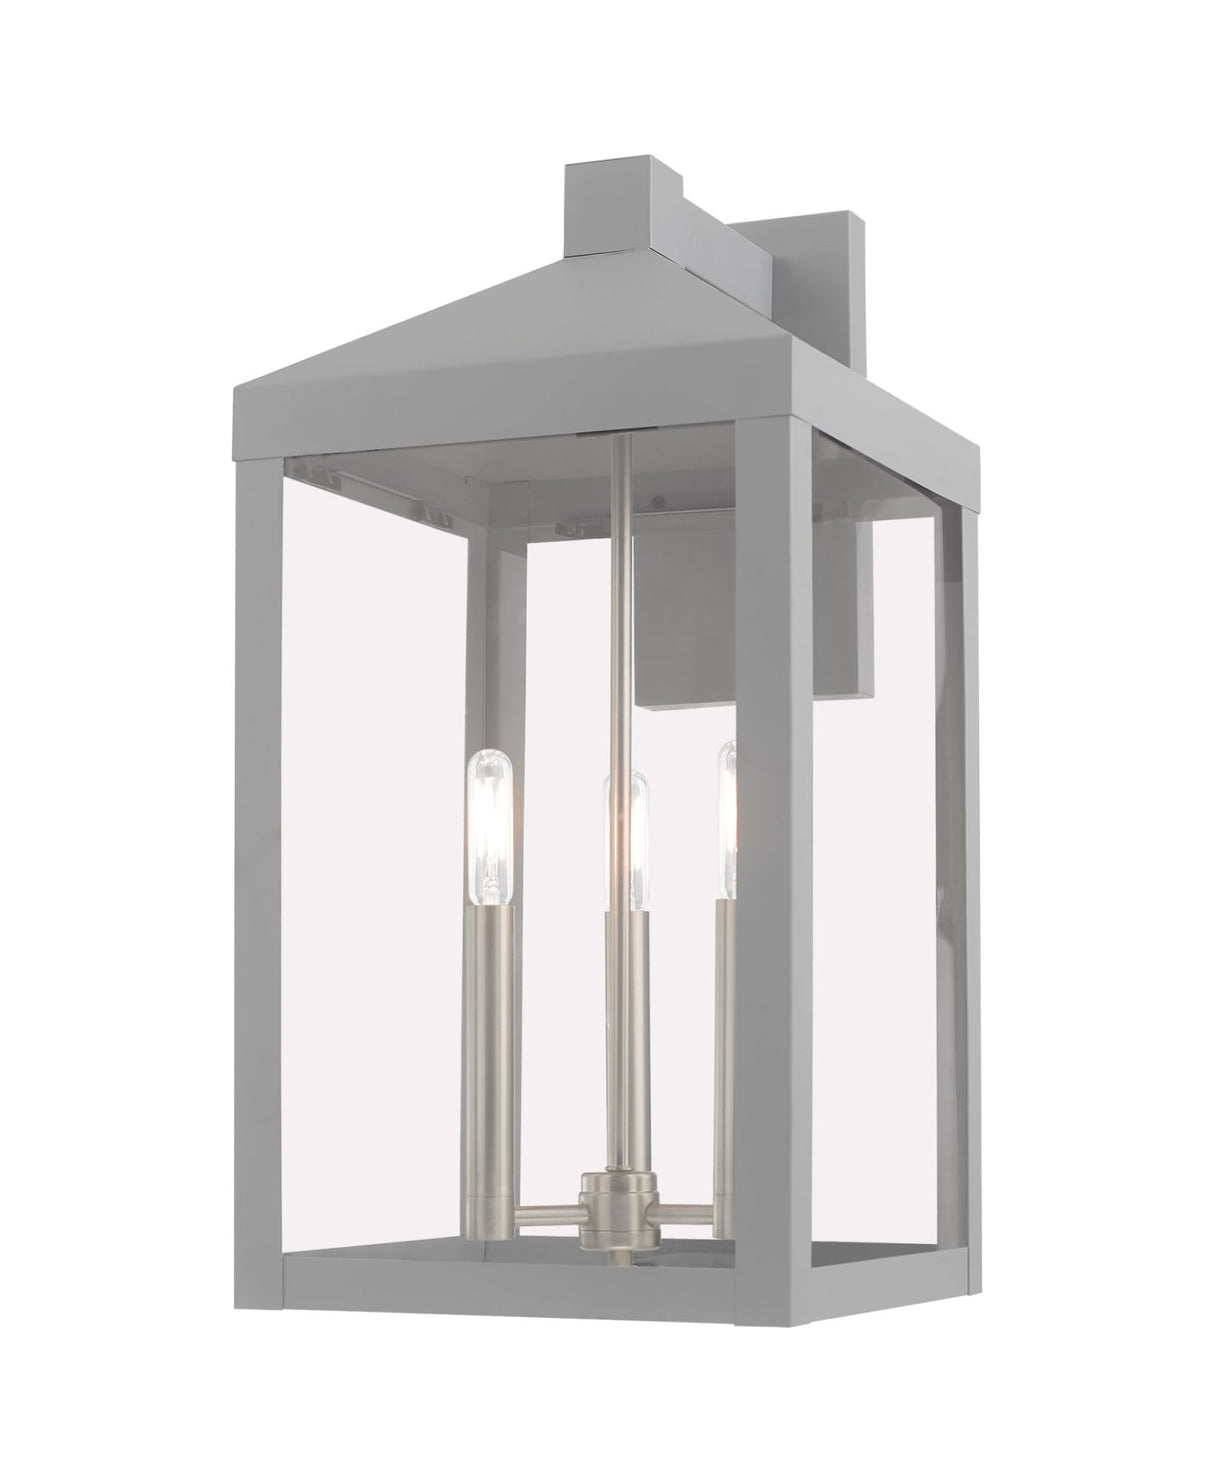 Livex Lighting 20585-91 Transitional Three Light Outdoor Wall Lantern from Nyack Collection in Pwt, Nckl, B/S, Slvr. Finish, Brushed Nickel